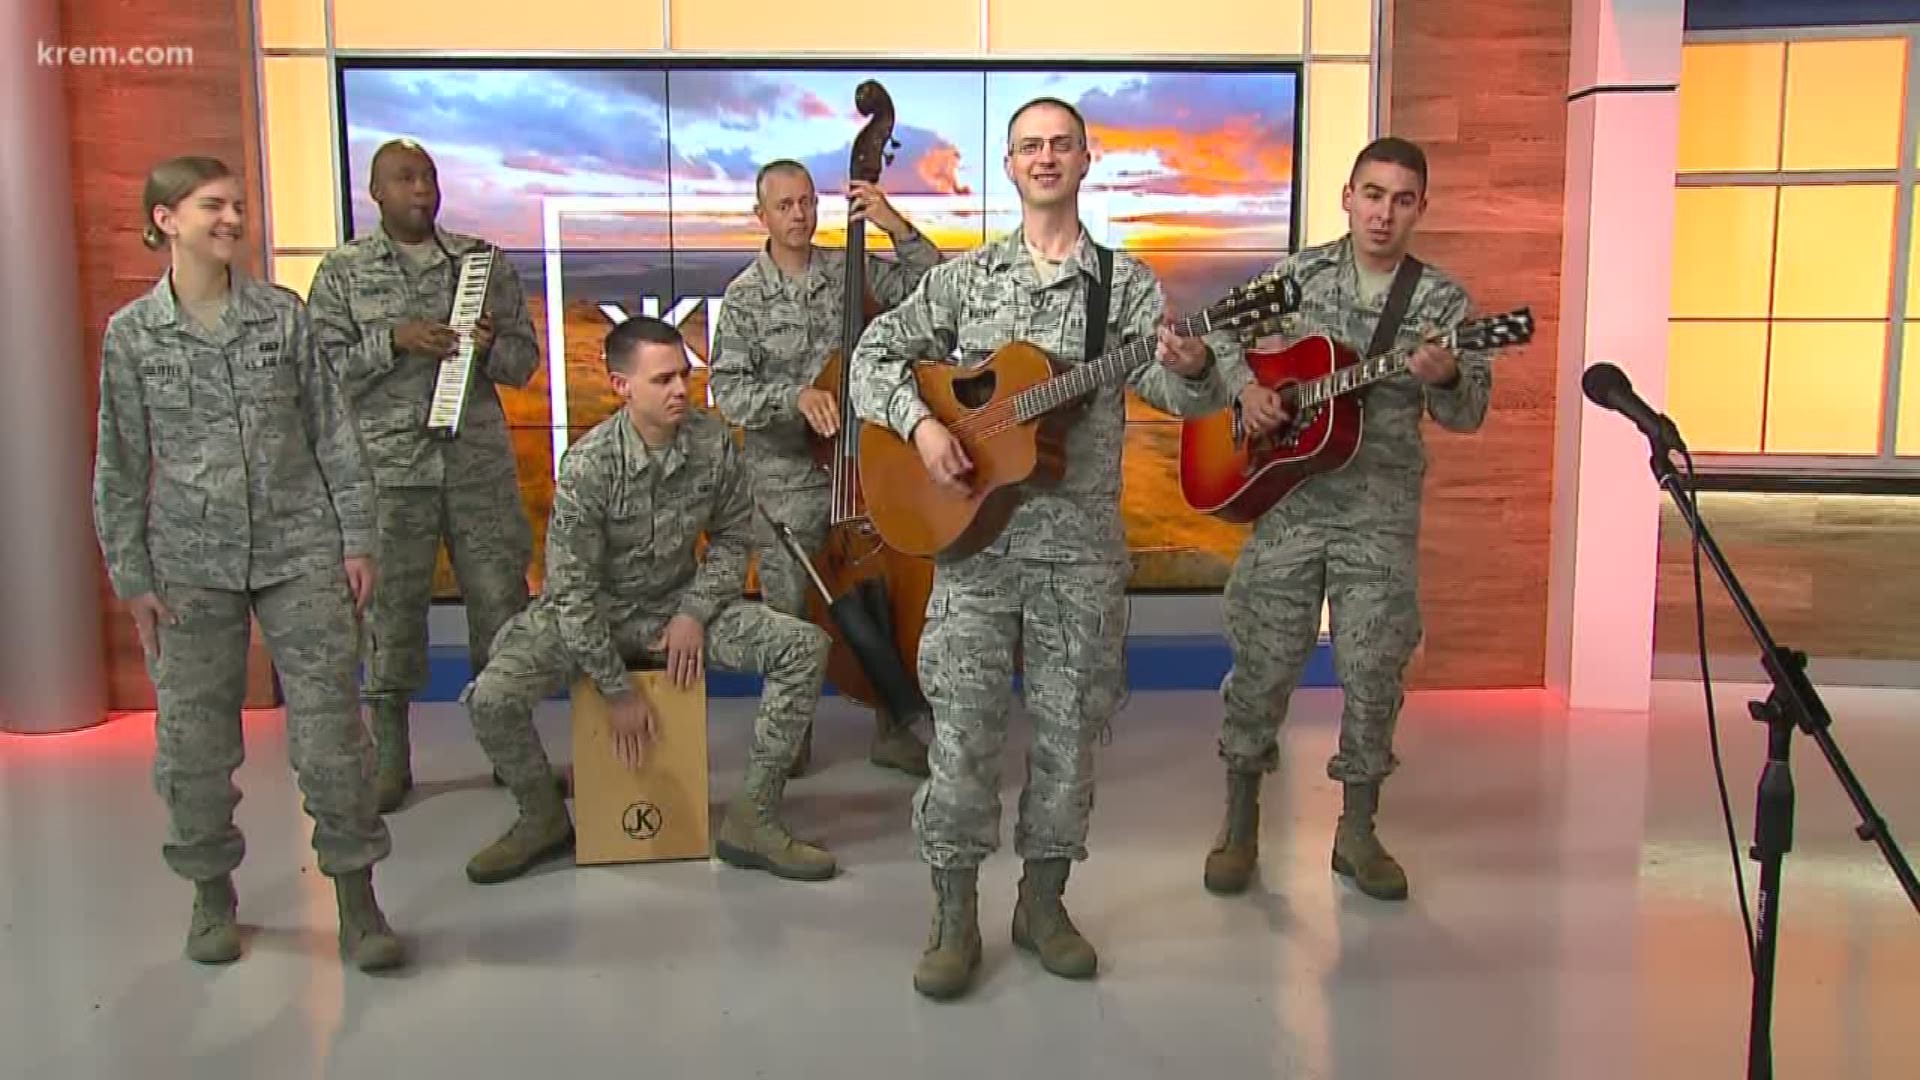 KREM's Amanda Roley and Jen York get a preview of the SkyFest2019 festivities with USAF MSgt. Clint Whitney and the Band of the Golden West.